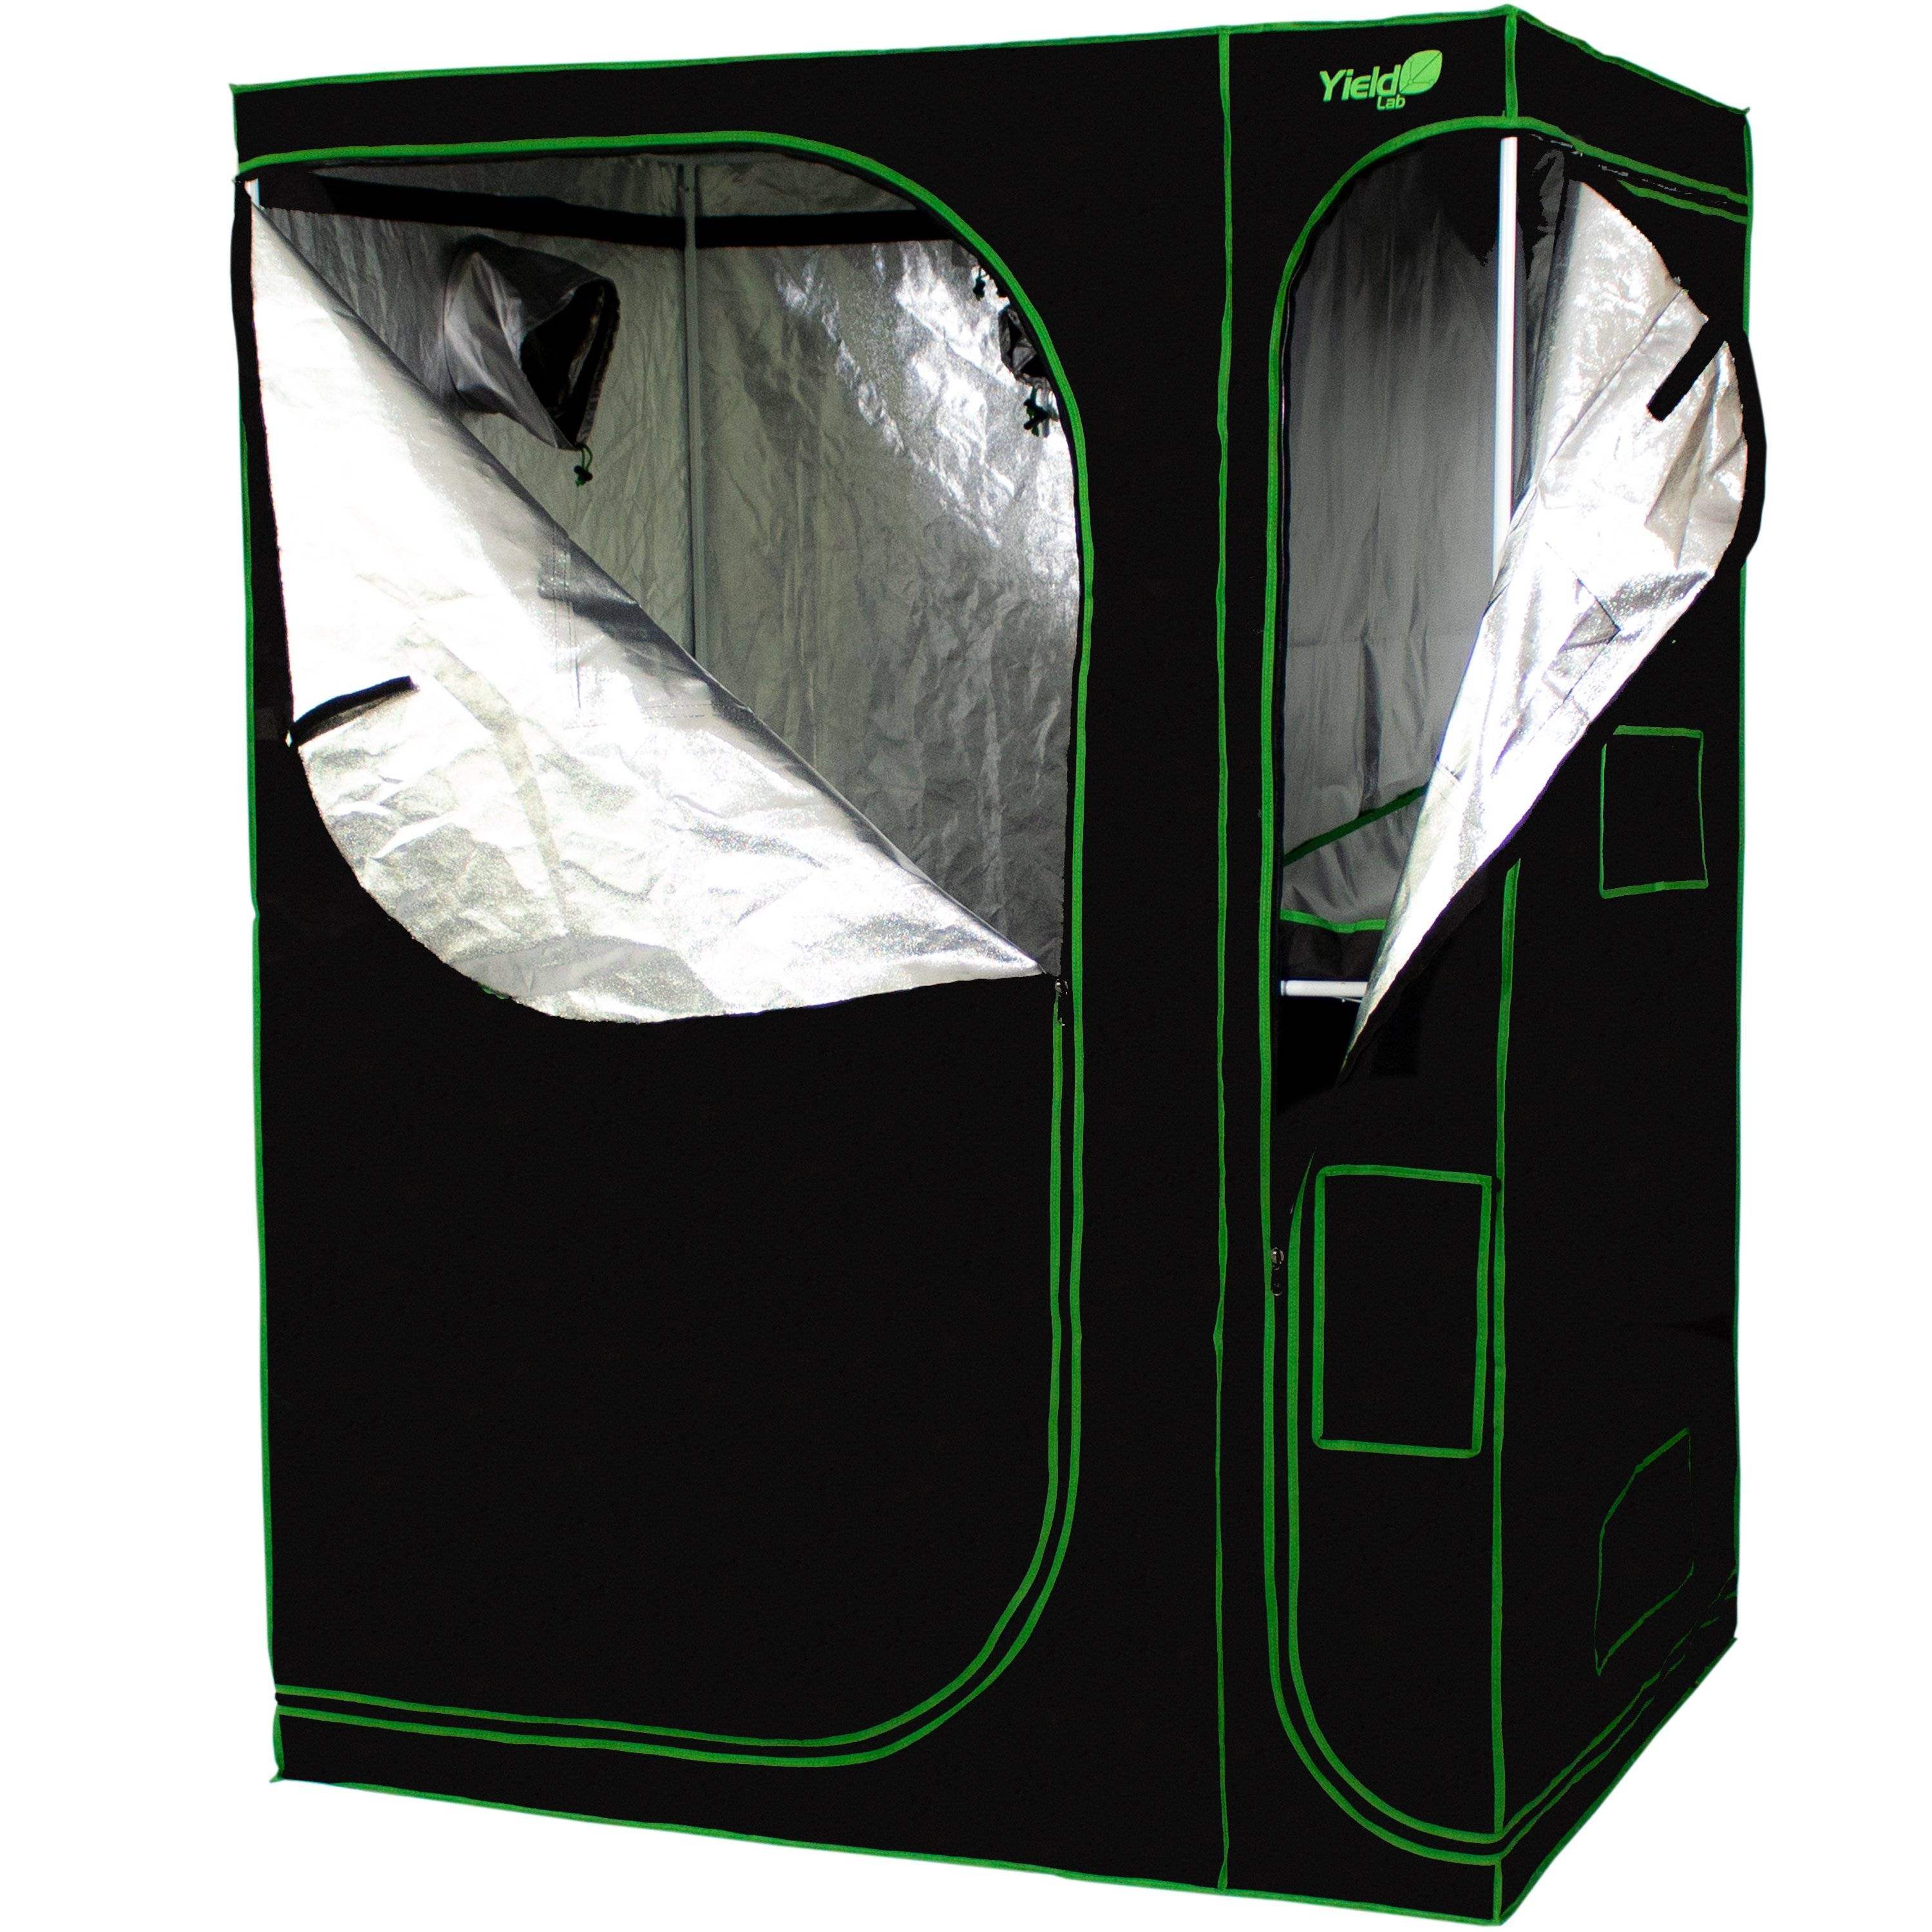 Yield Lab 60” x 48” x 80” 2-in-1 Full Cycle Reflective Grow Tent (5x4)